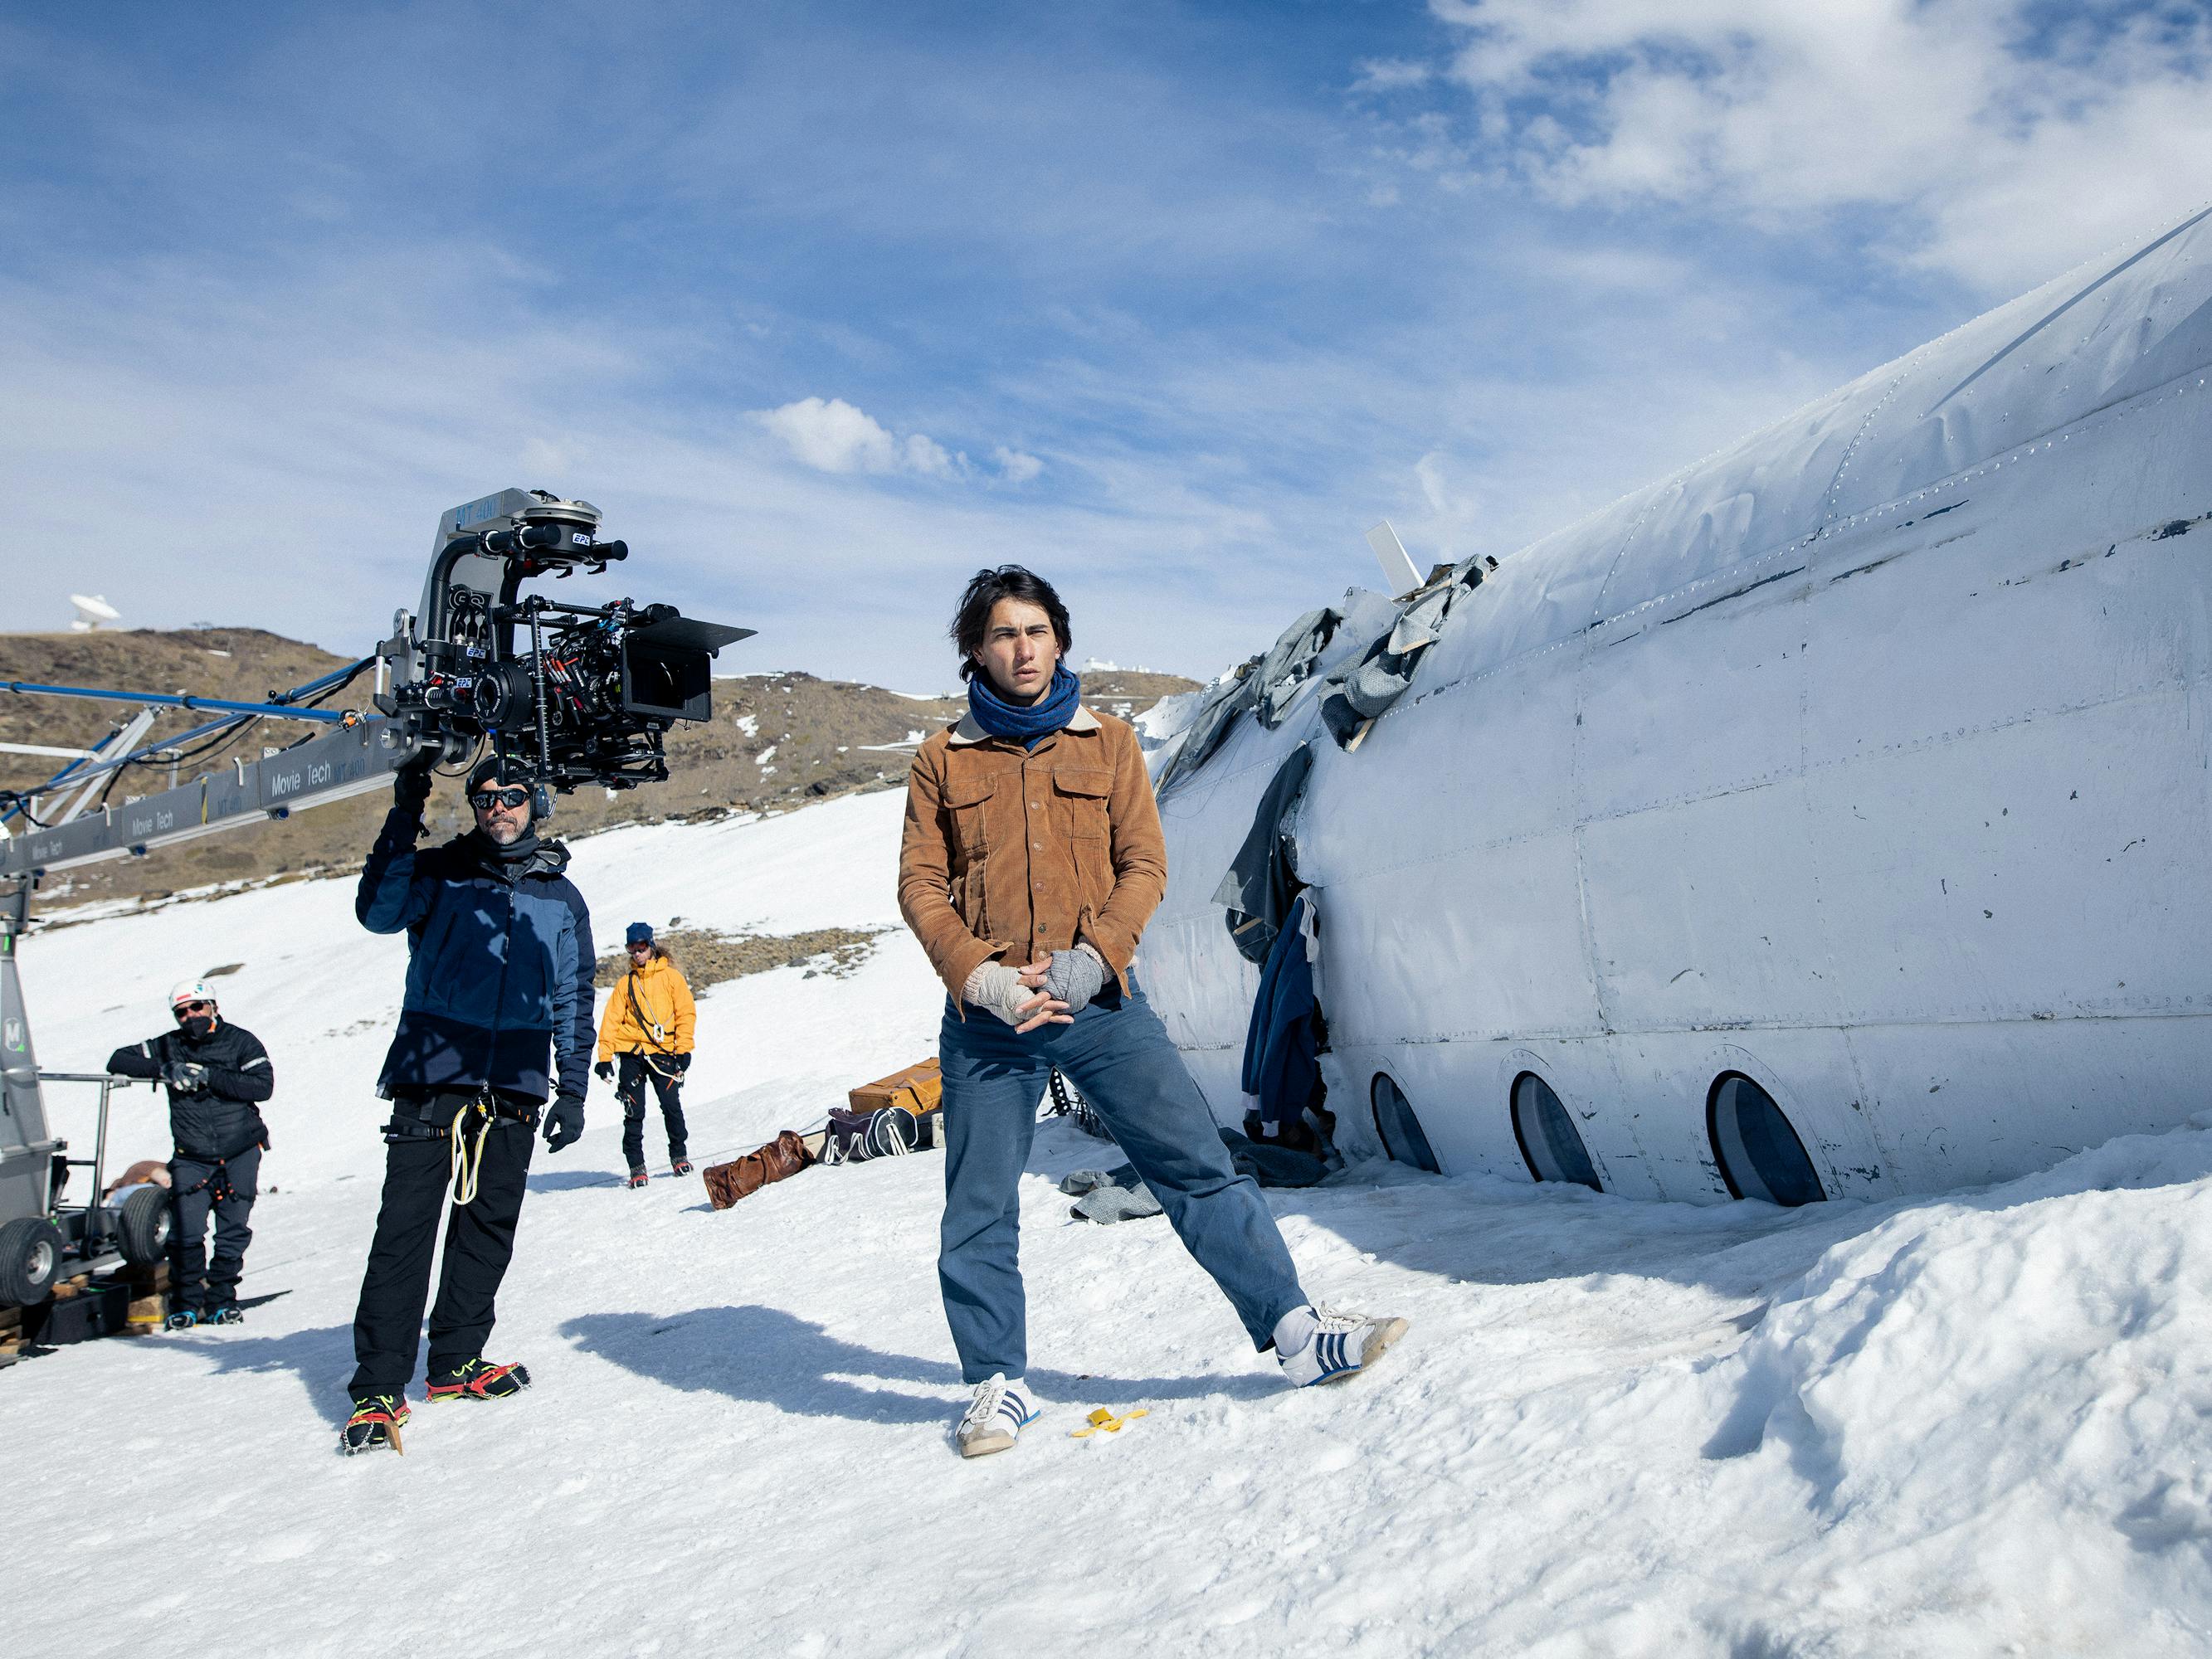 Behind the scenes with Enzo Vogrincic. He stands by a plane set on a snowy, cold set.